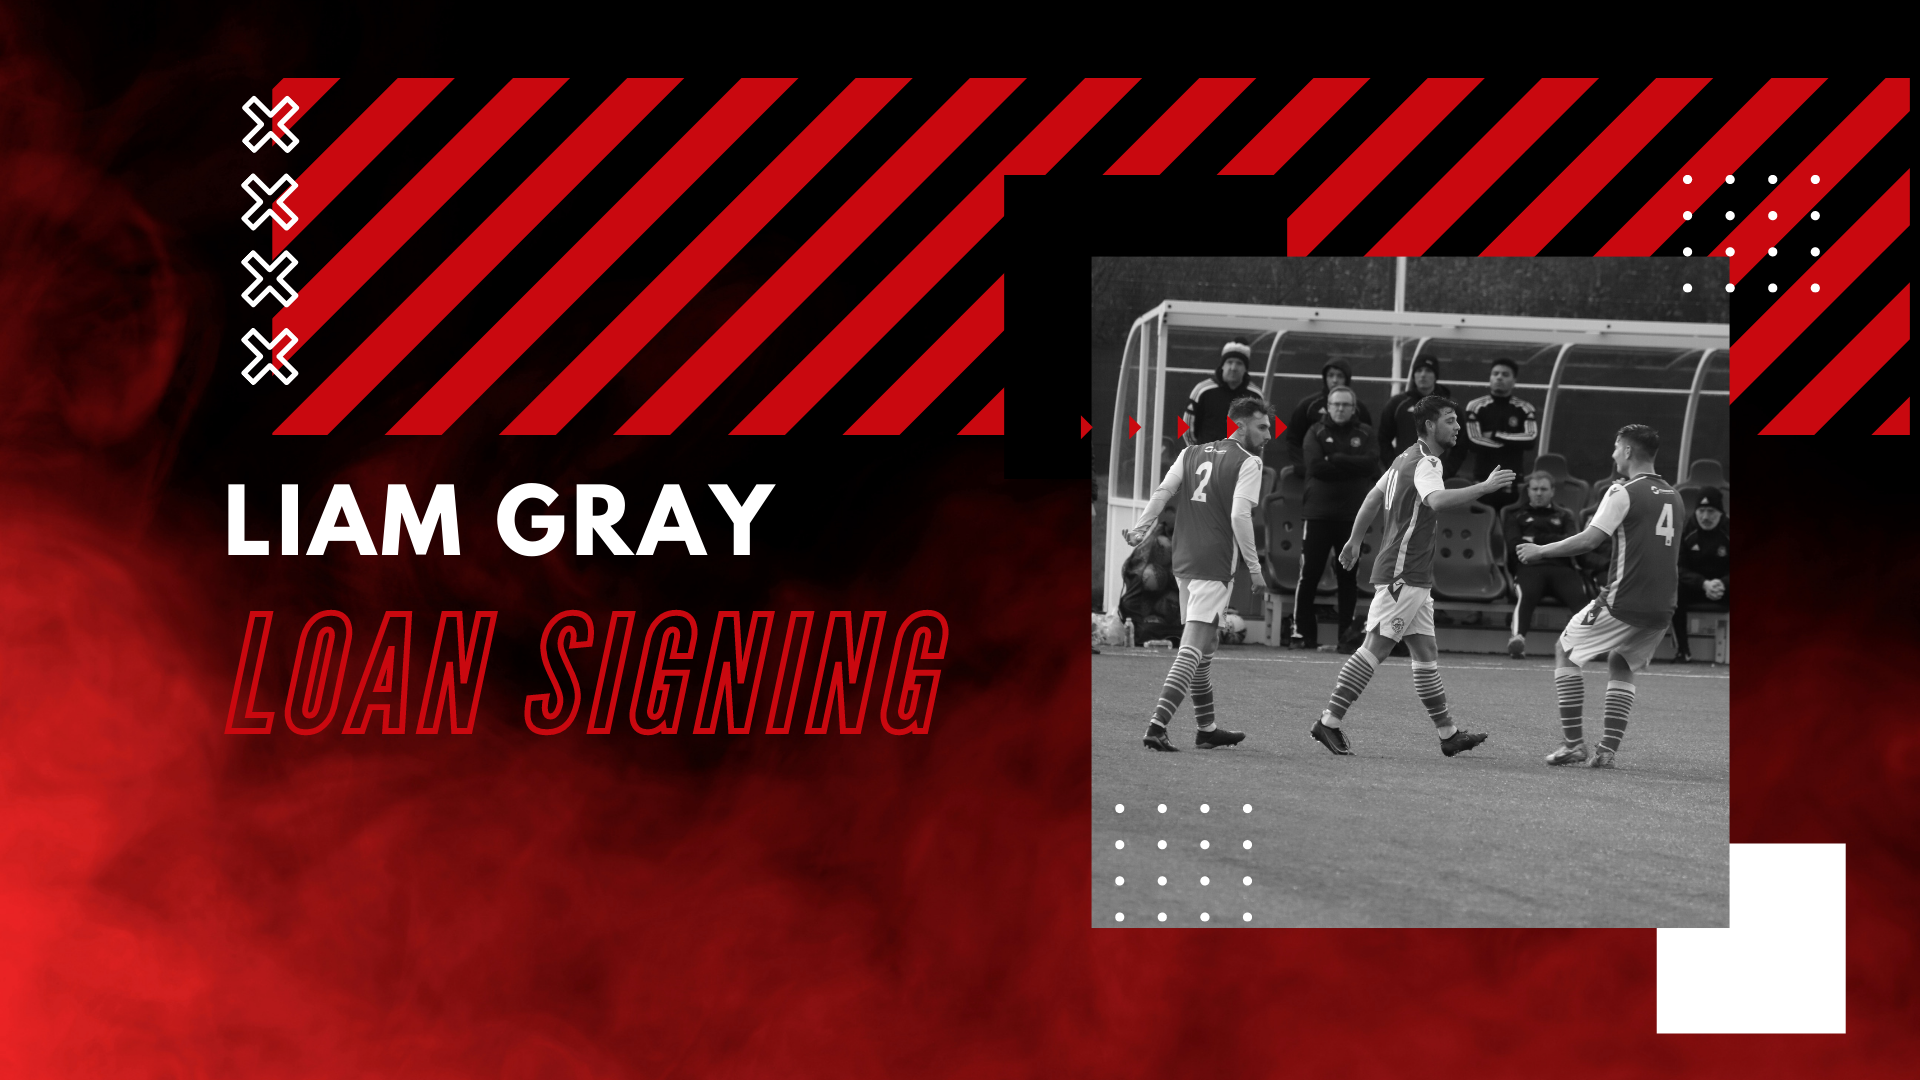 Liam Gray Loan Signing